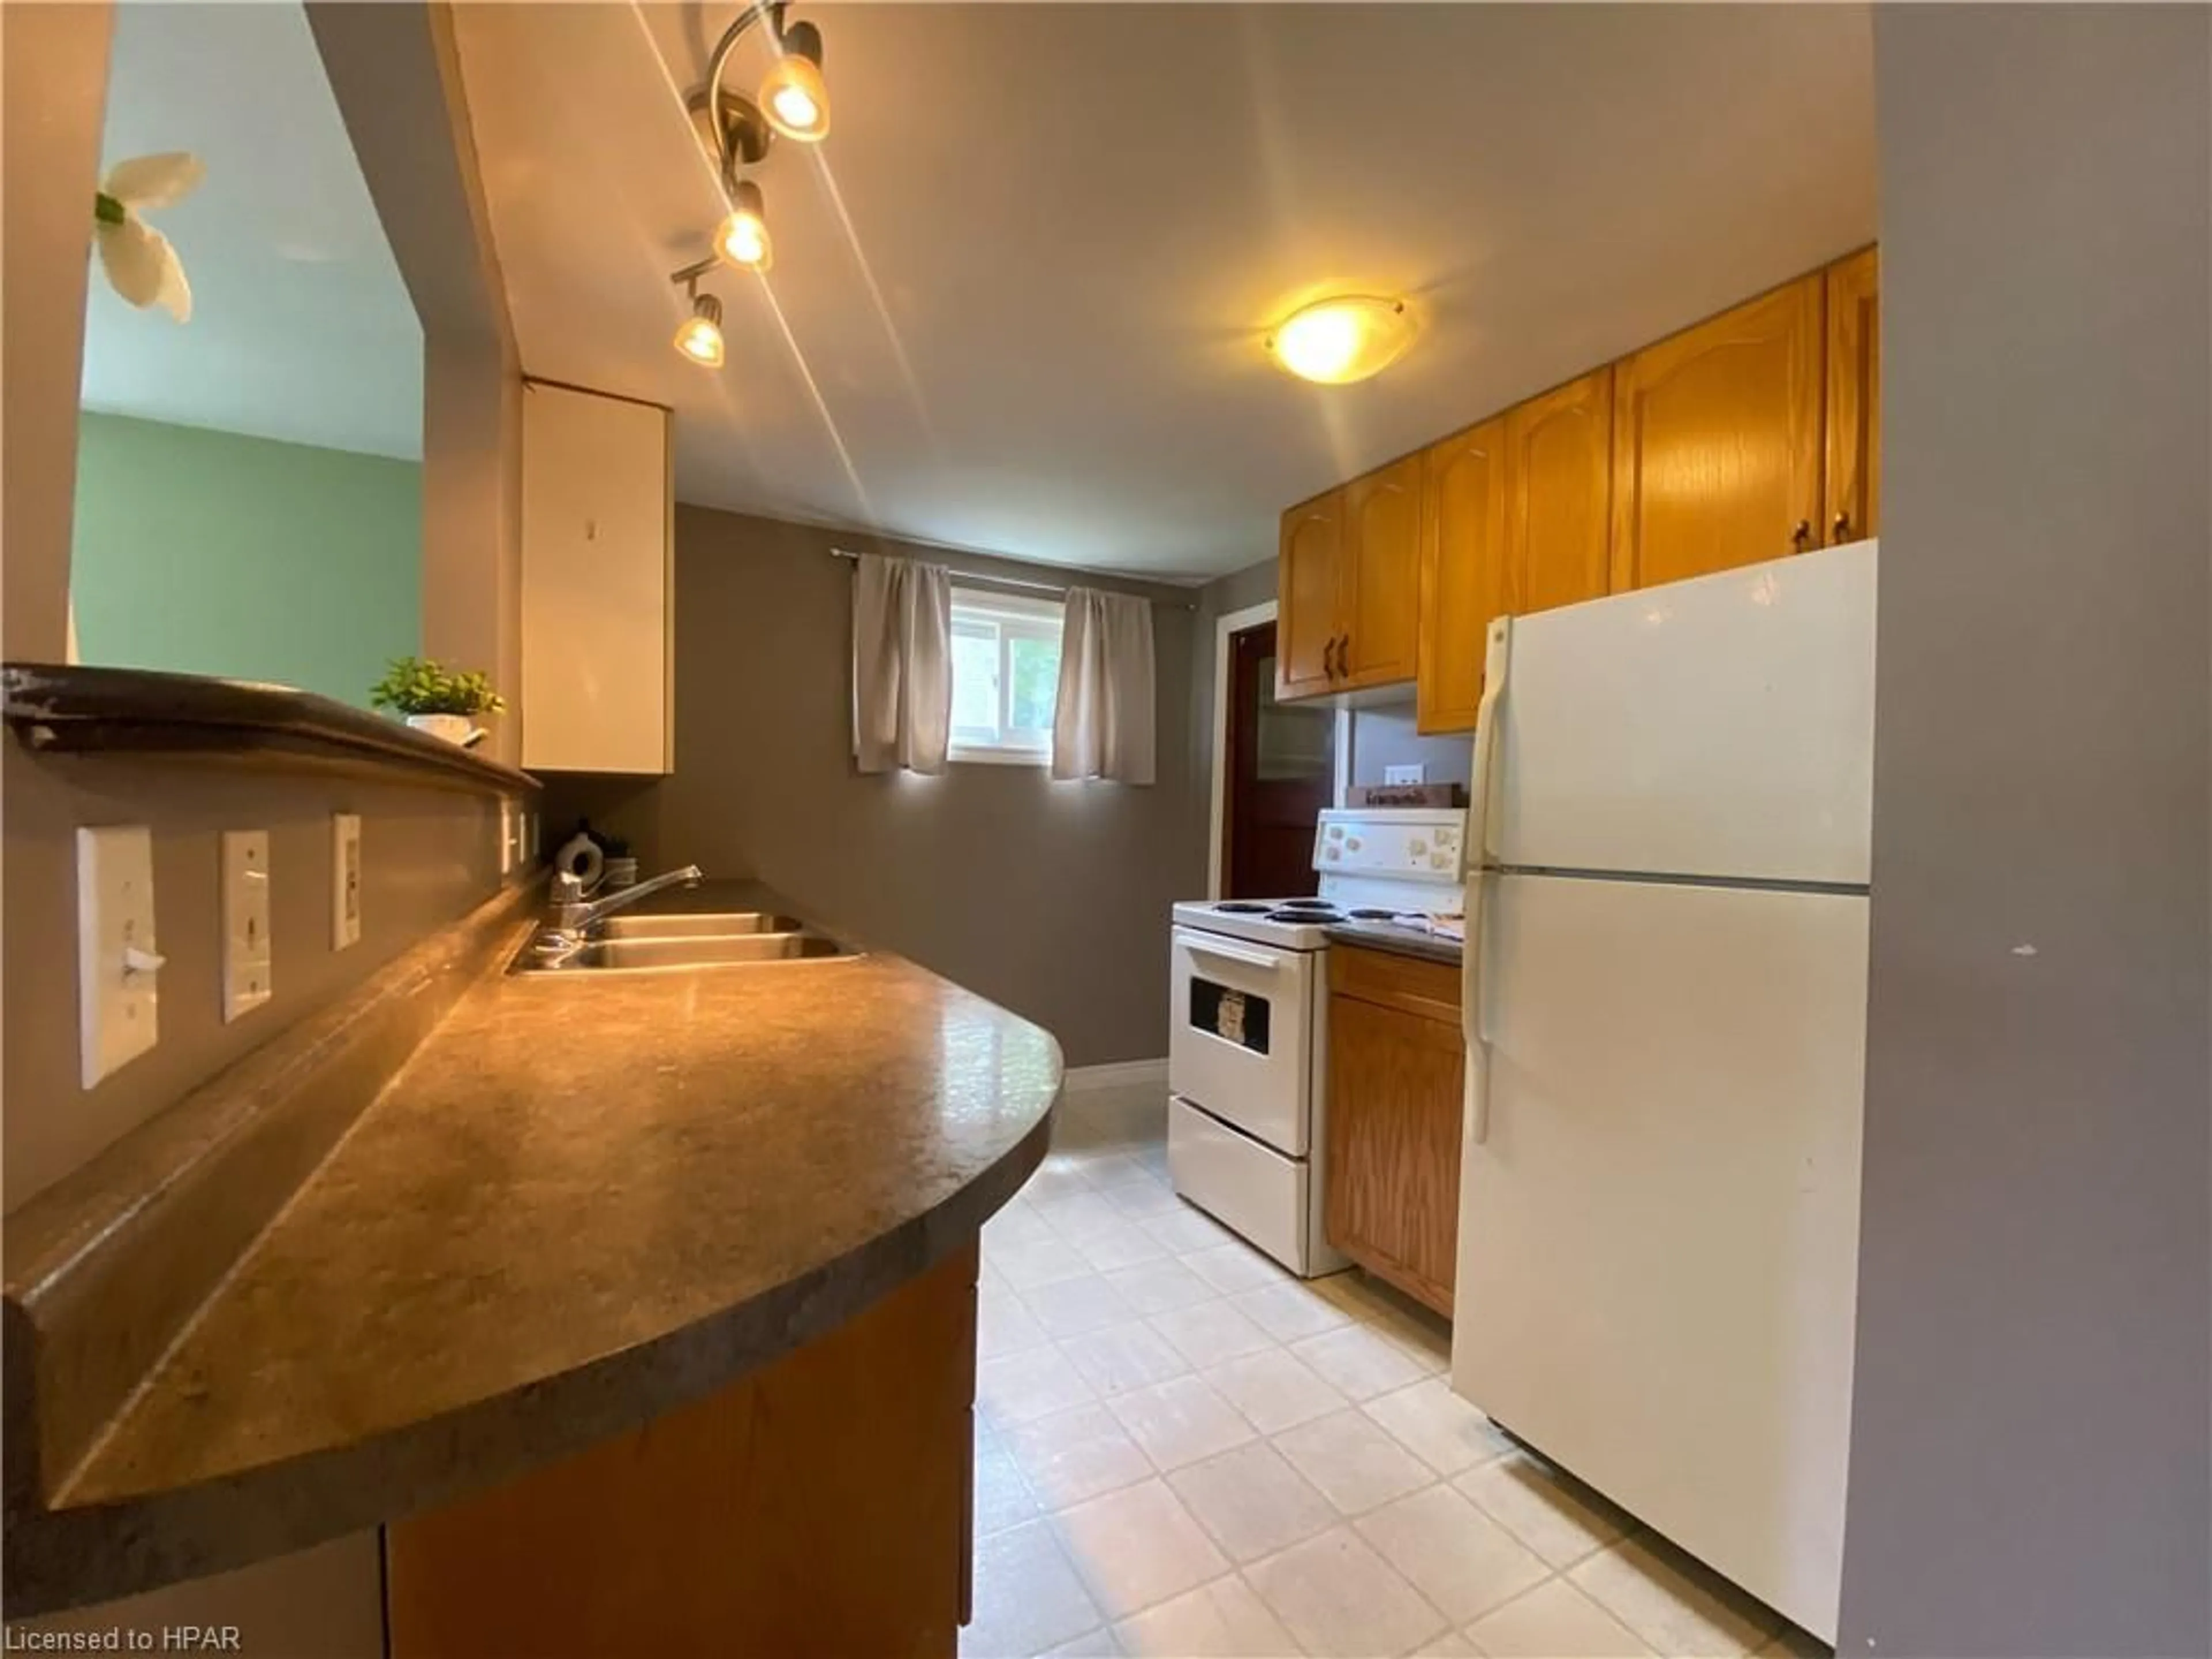 Standard kitchen for 328 11th Ave, Hanover Ontario N4N 2R5